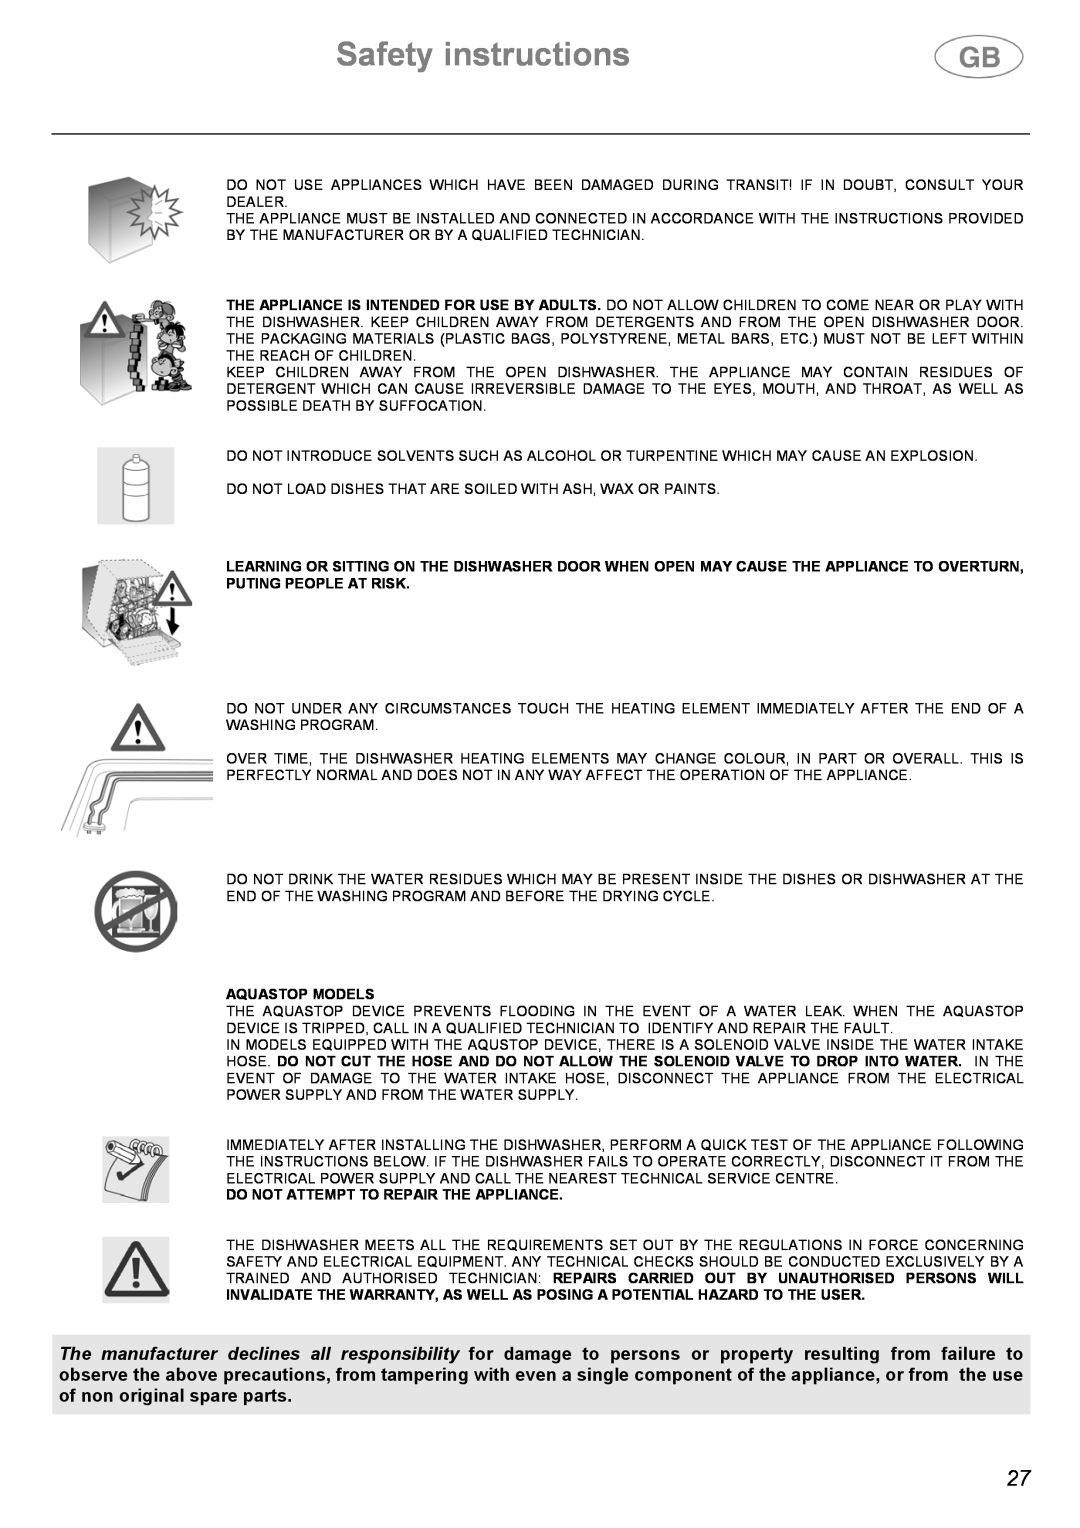 Smeg CA01-1 instruction manual Safety instructions, Aquastop Models, Do Not Attempt To Repair The Appliance 